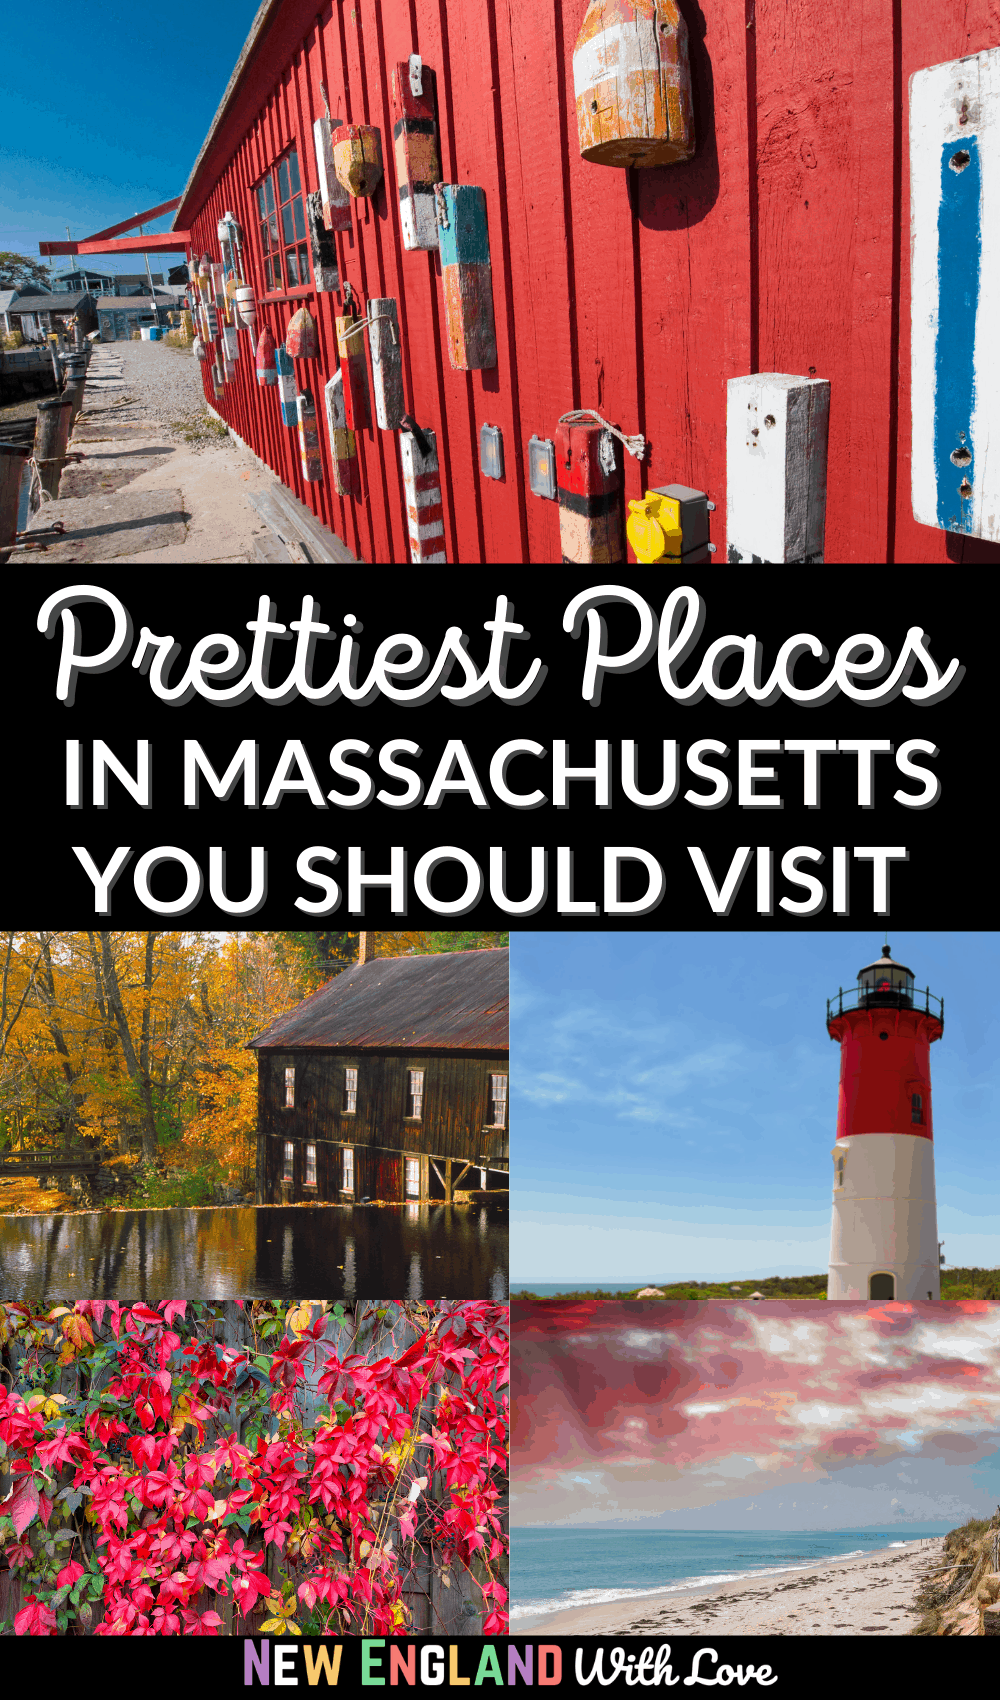 Pinterest graphic reading "Prettiest Places in MASSACHUSETTS YOU SHOULD VISIT"